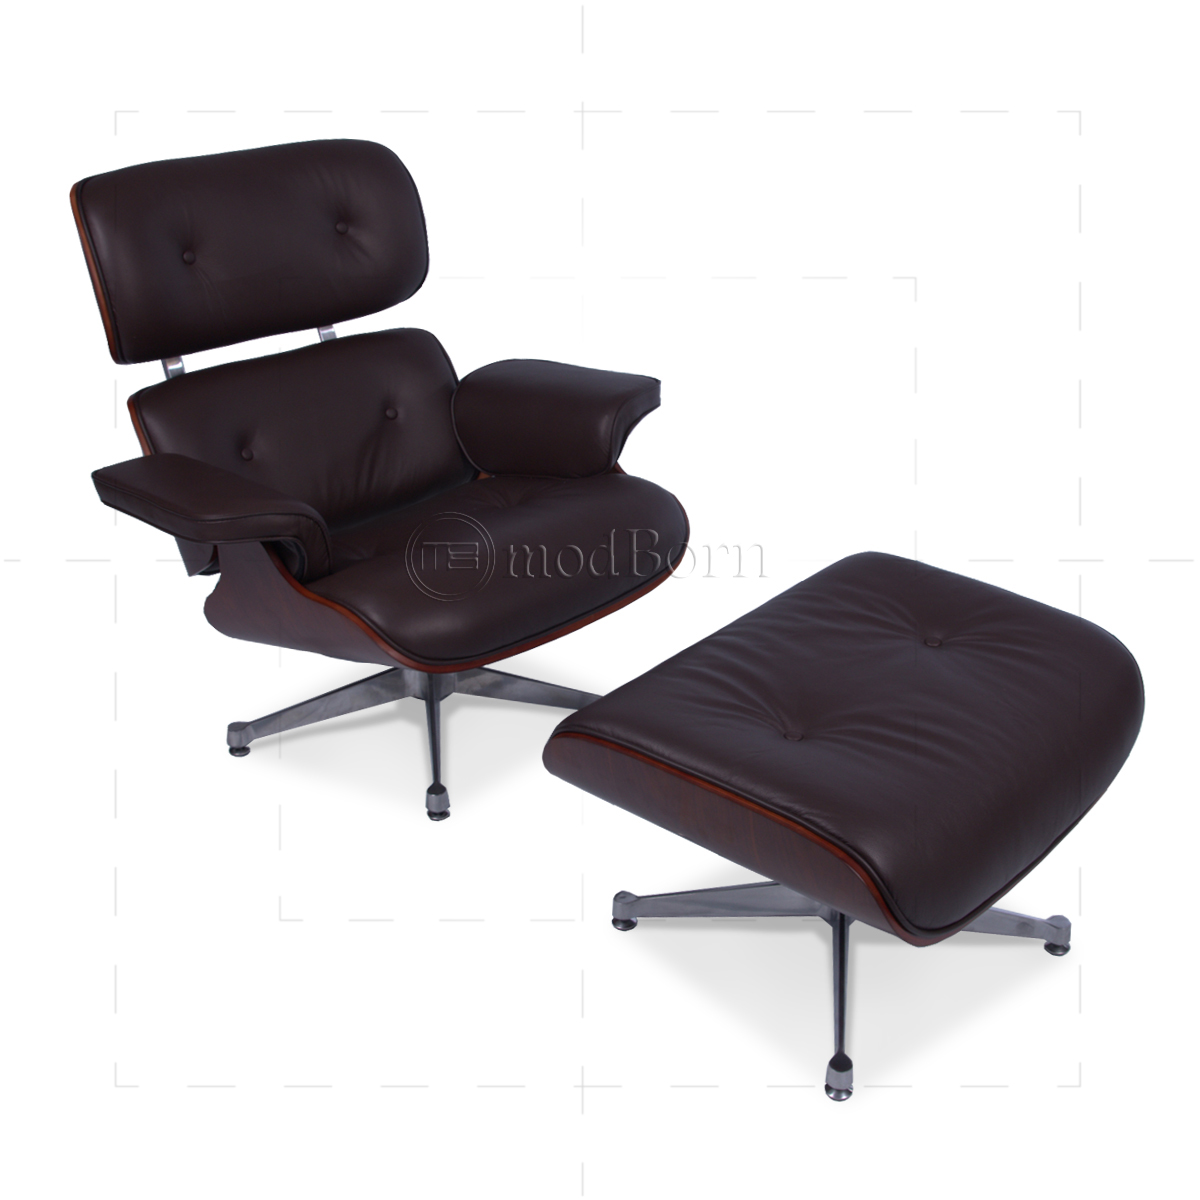 Eames Style Lounge Chair And Ottoman Brown Leather Cherry Wood